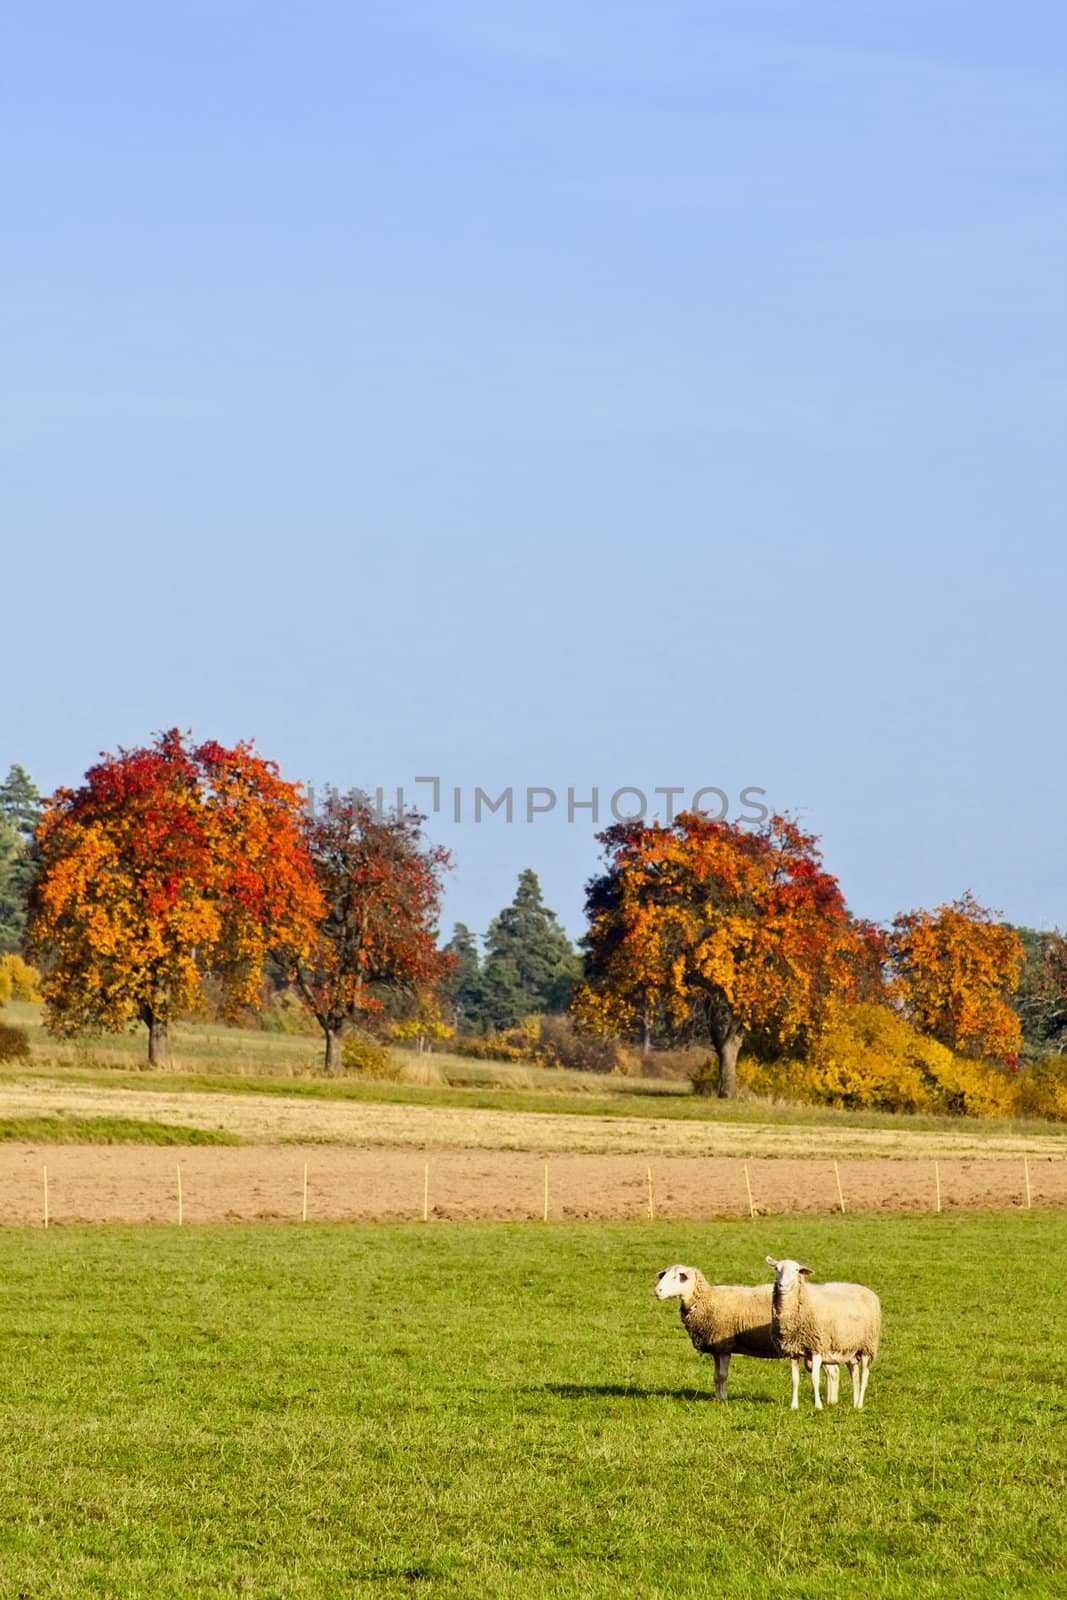 This image shows two sheeps in fall